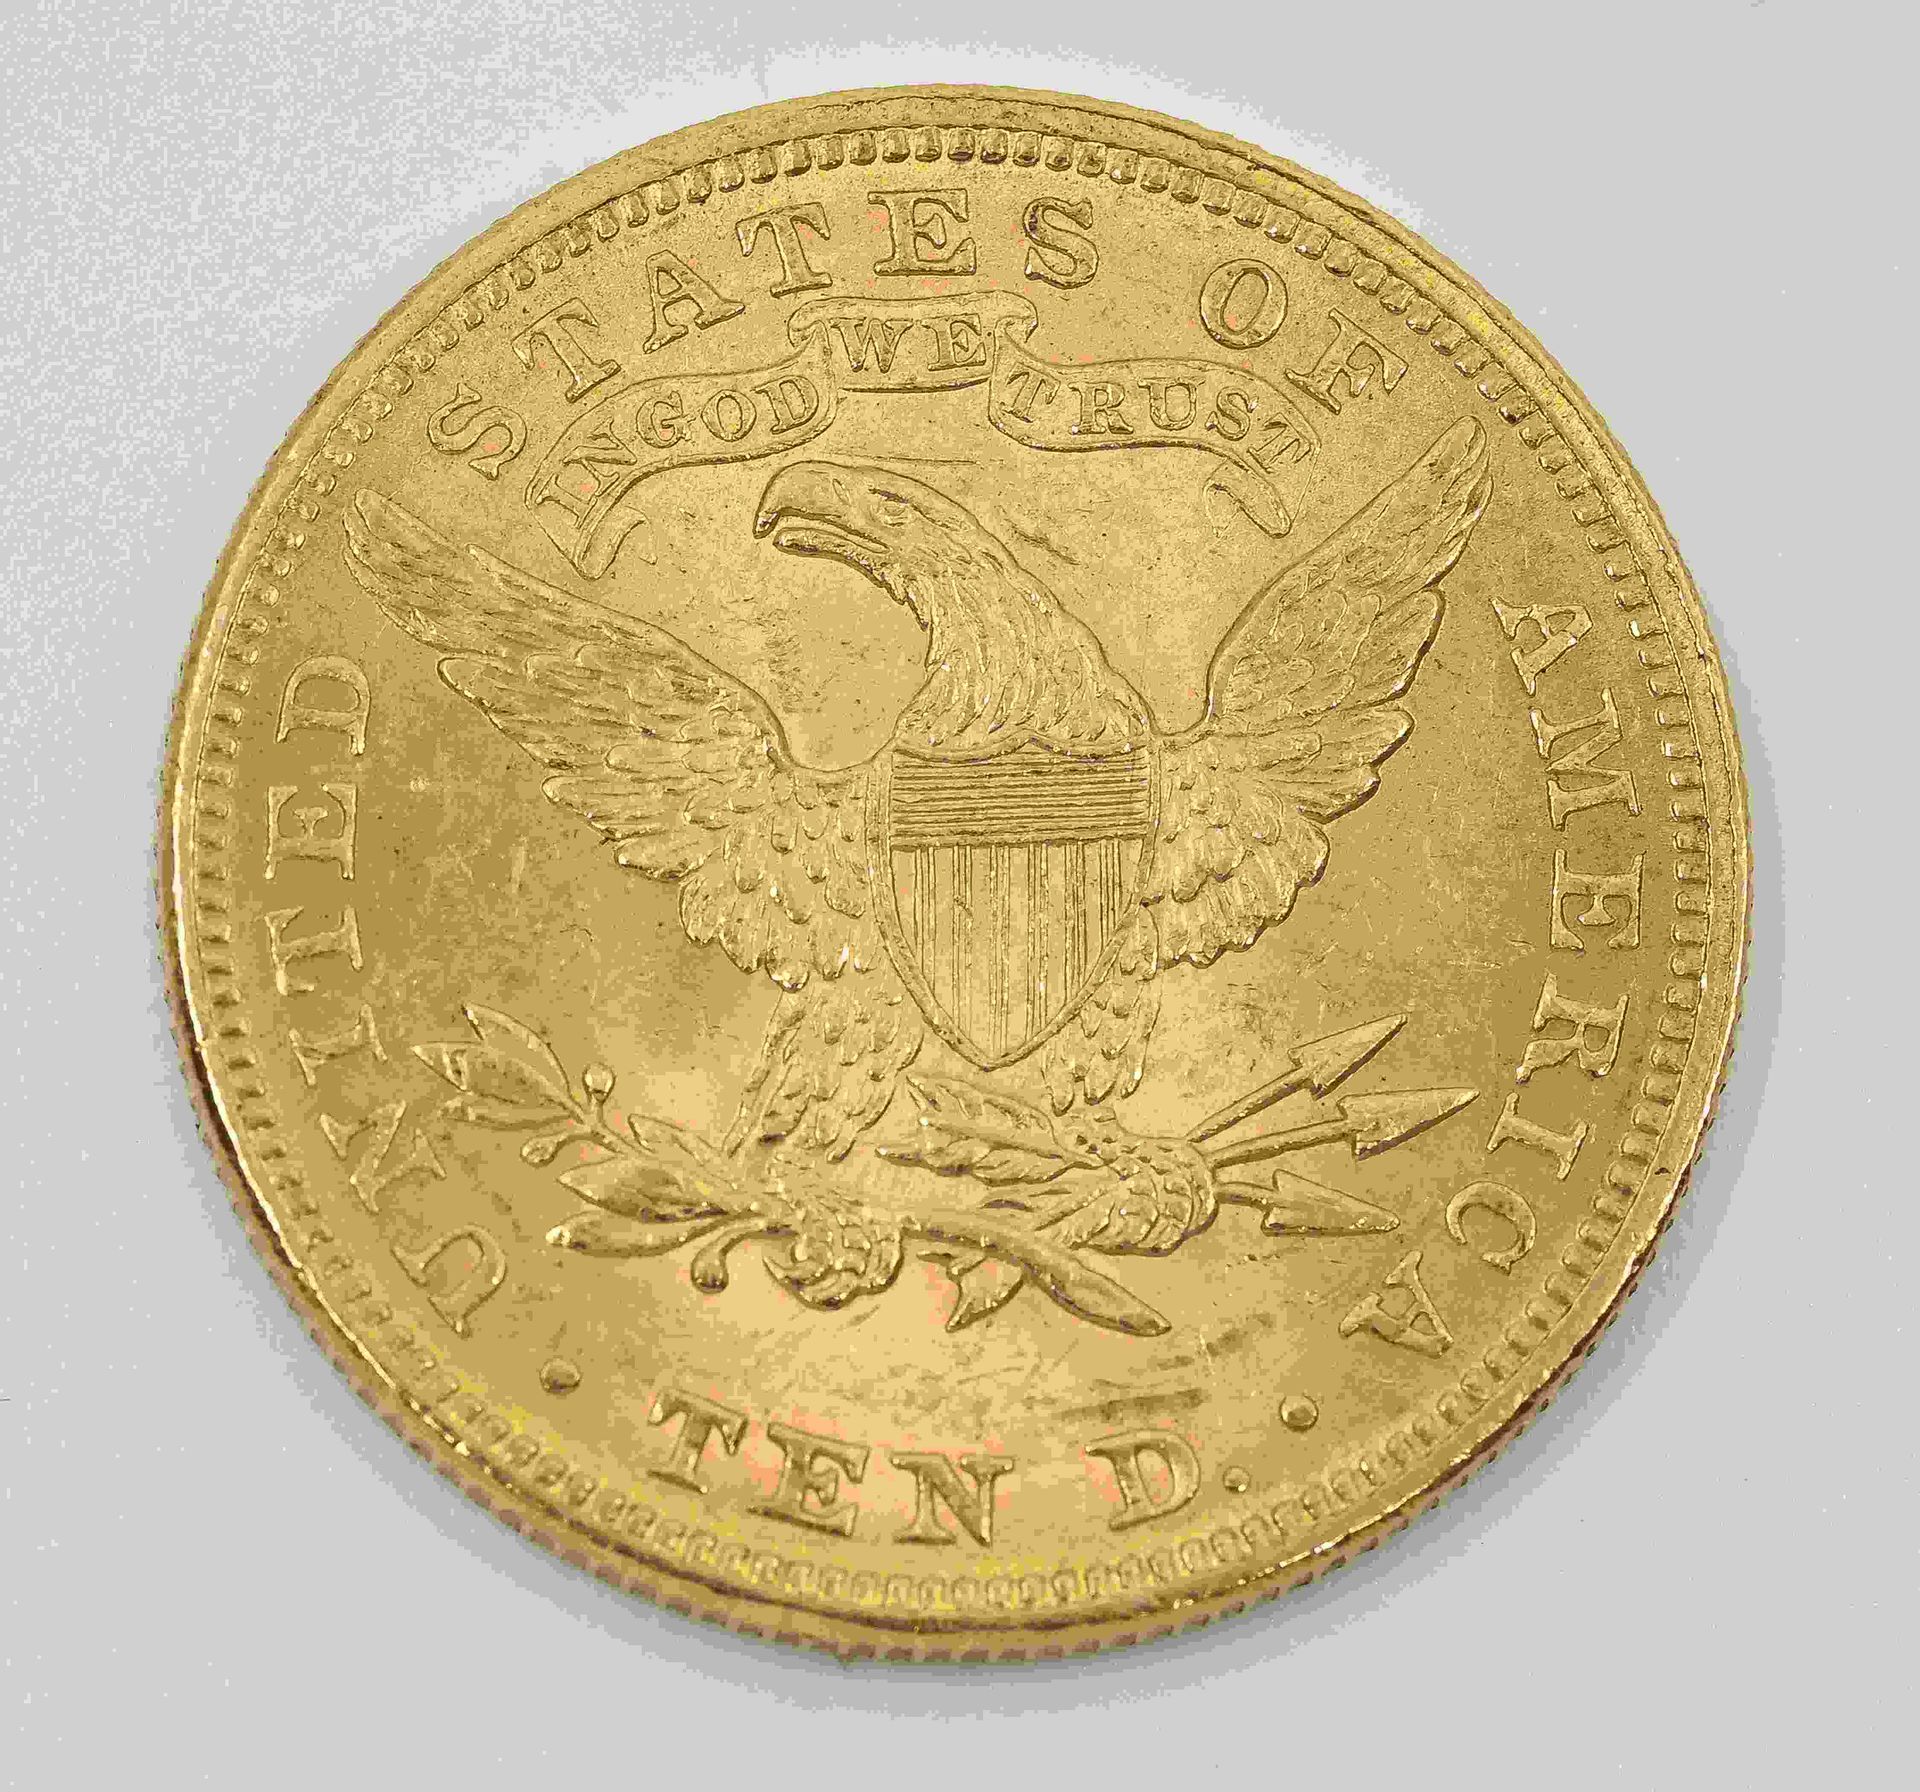 Null Coin of 10 US $ 916°°° LIBERTY PHILADELPHIA, 1894.
Used condition with micr&hellip;